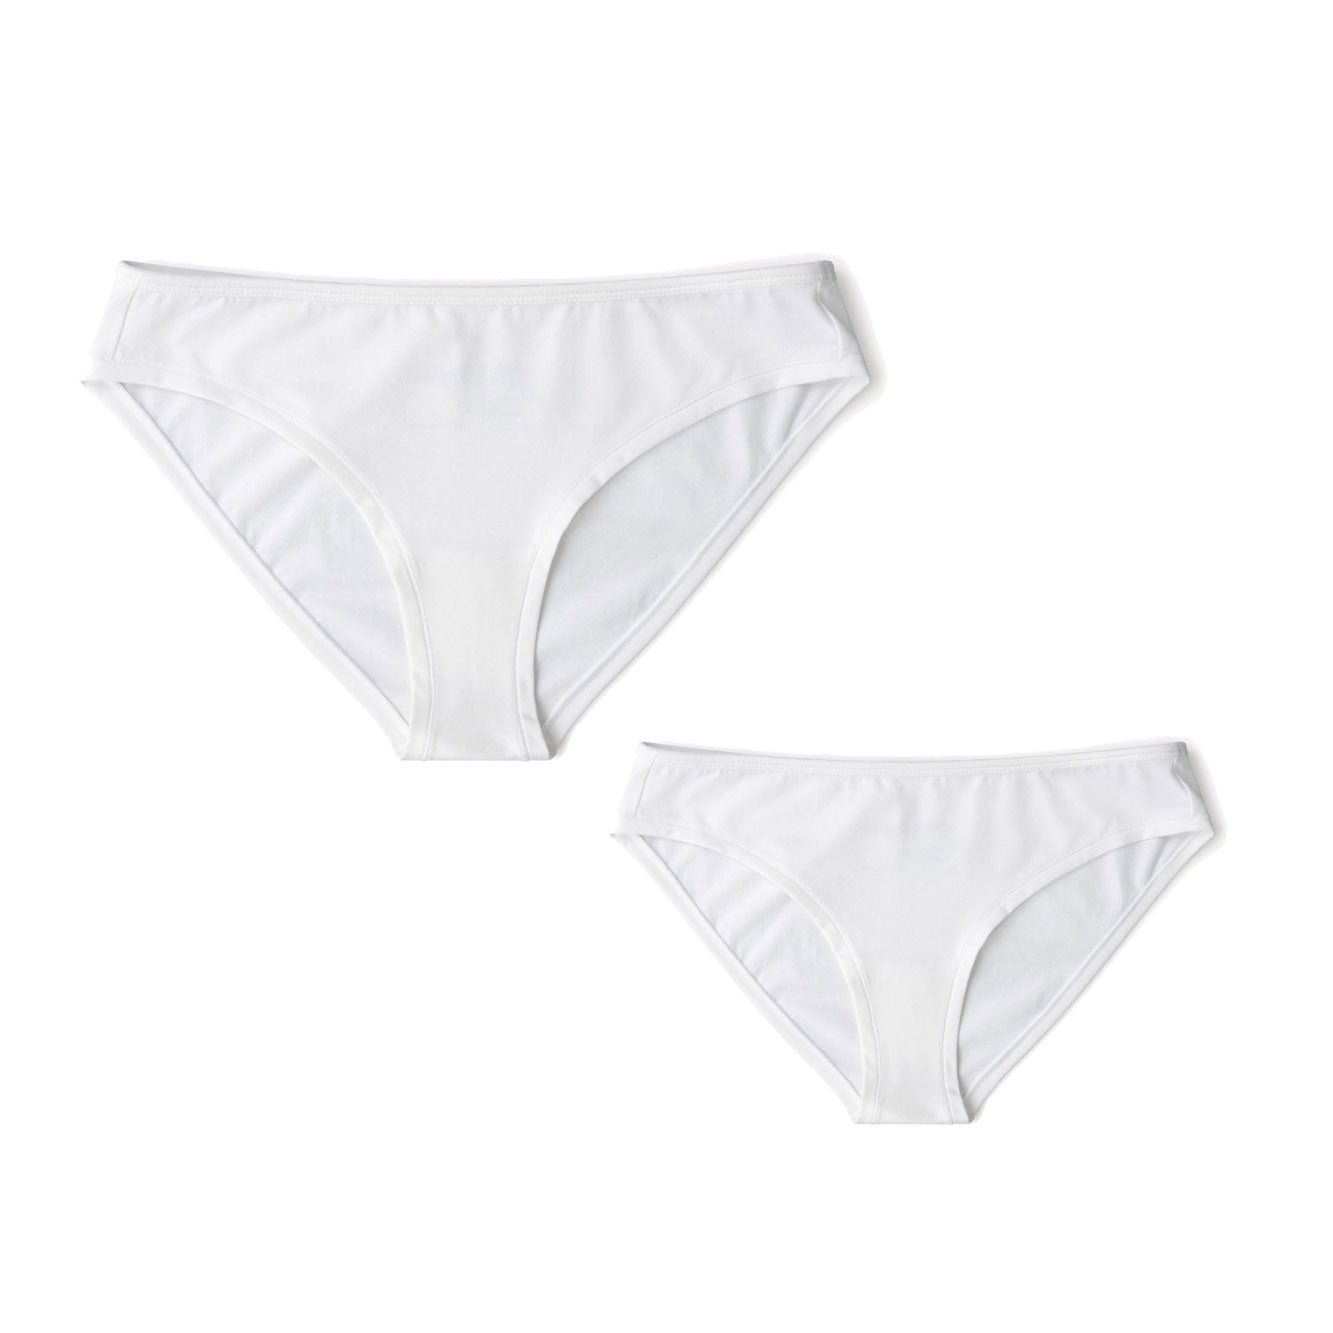 White ladies underwear, mid rise briefs, first fit promise 2 pack